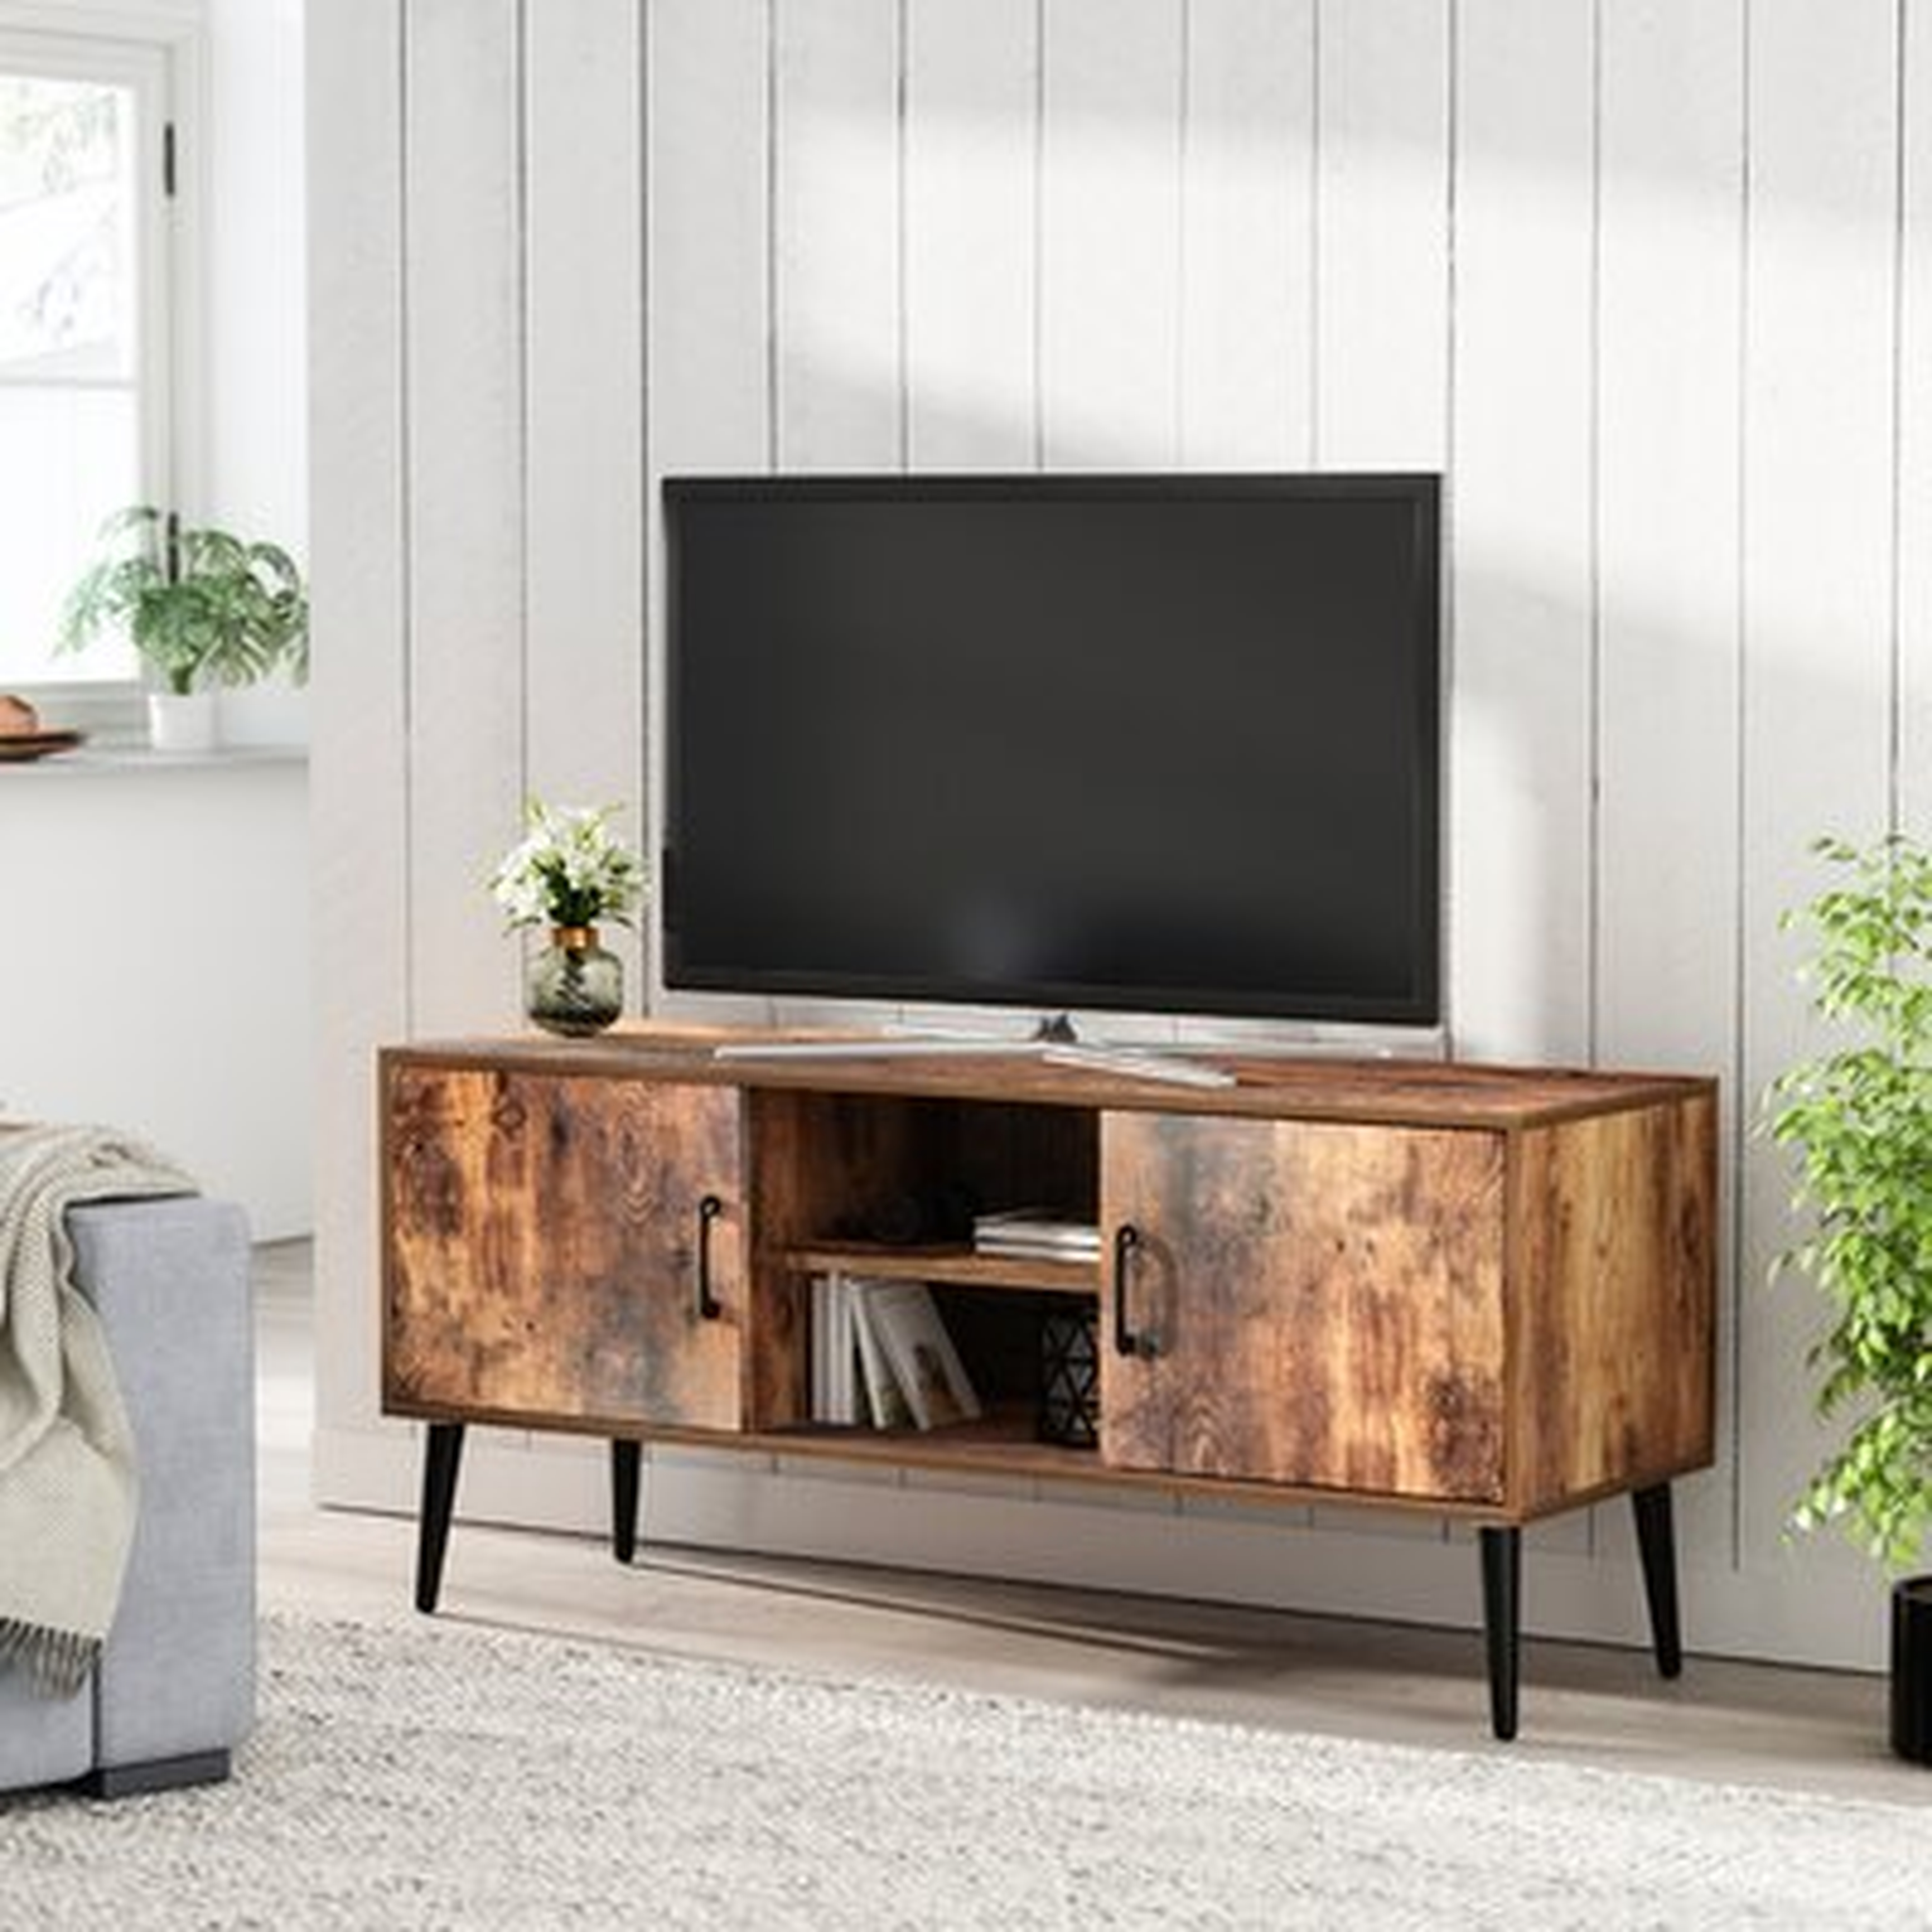 Rustic TV Console Cabinet For Tvs Up To 55 Inch W, Farmhouse TV Stand Style Entertainment Center For Soundbar Or Other Media - Wayfair